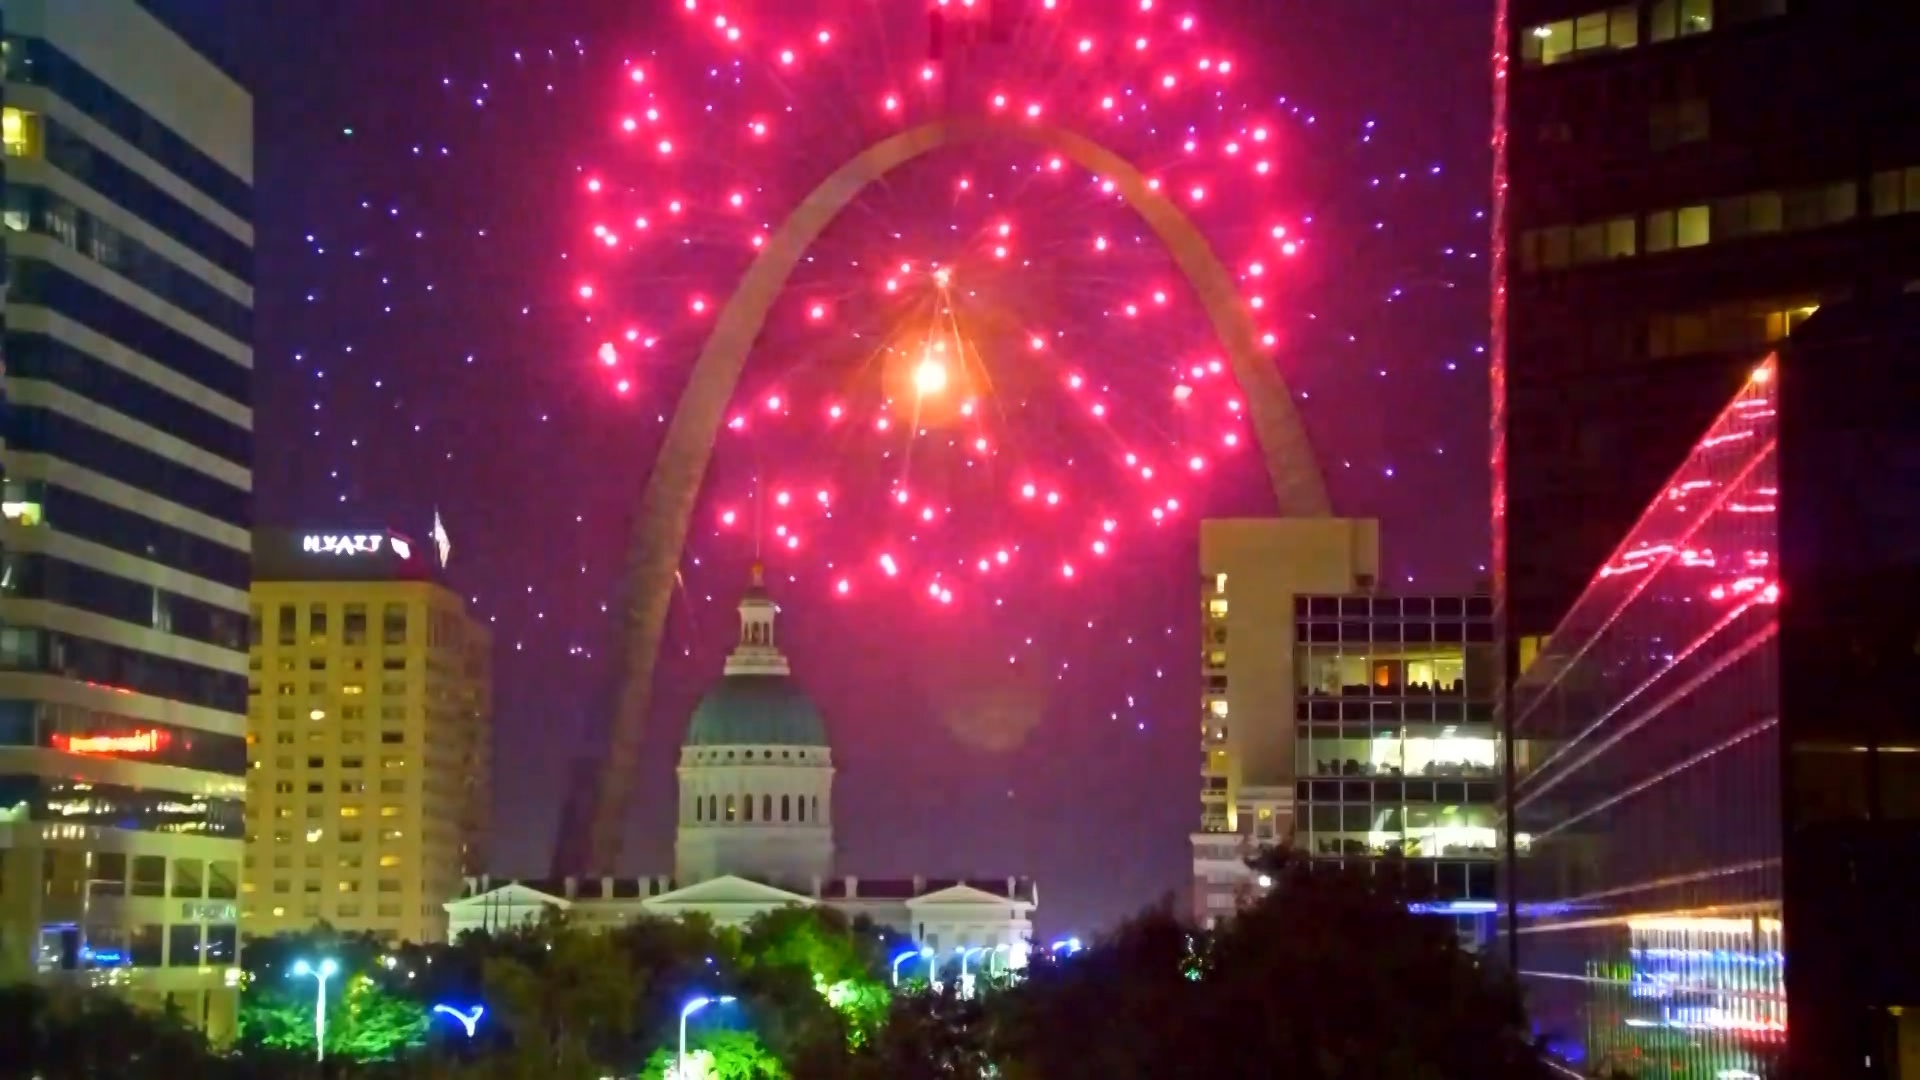 A spectacular fireworks show capped off a day of July 4 activities at Celebrate Saint Louis on the riverfront.